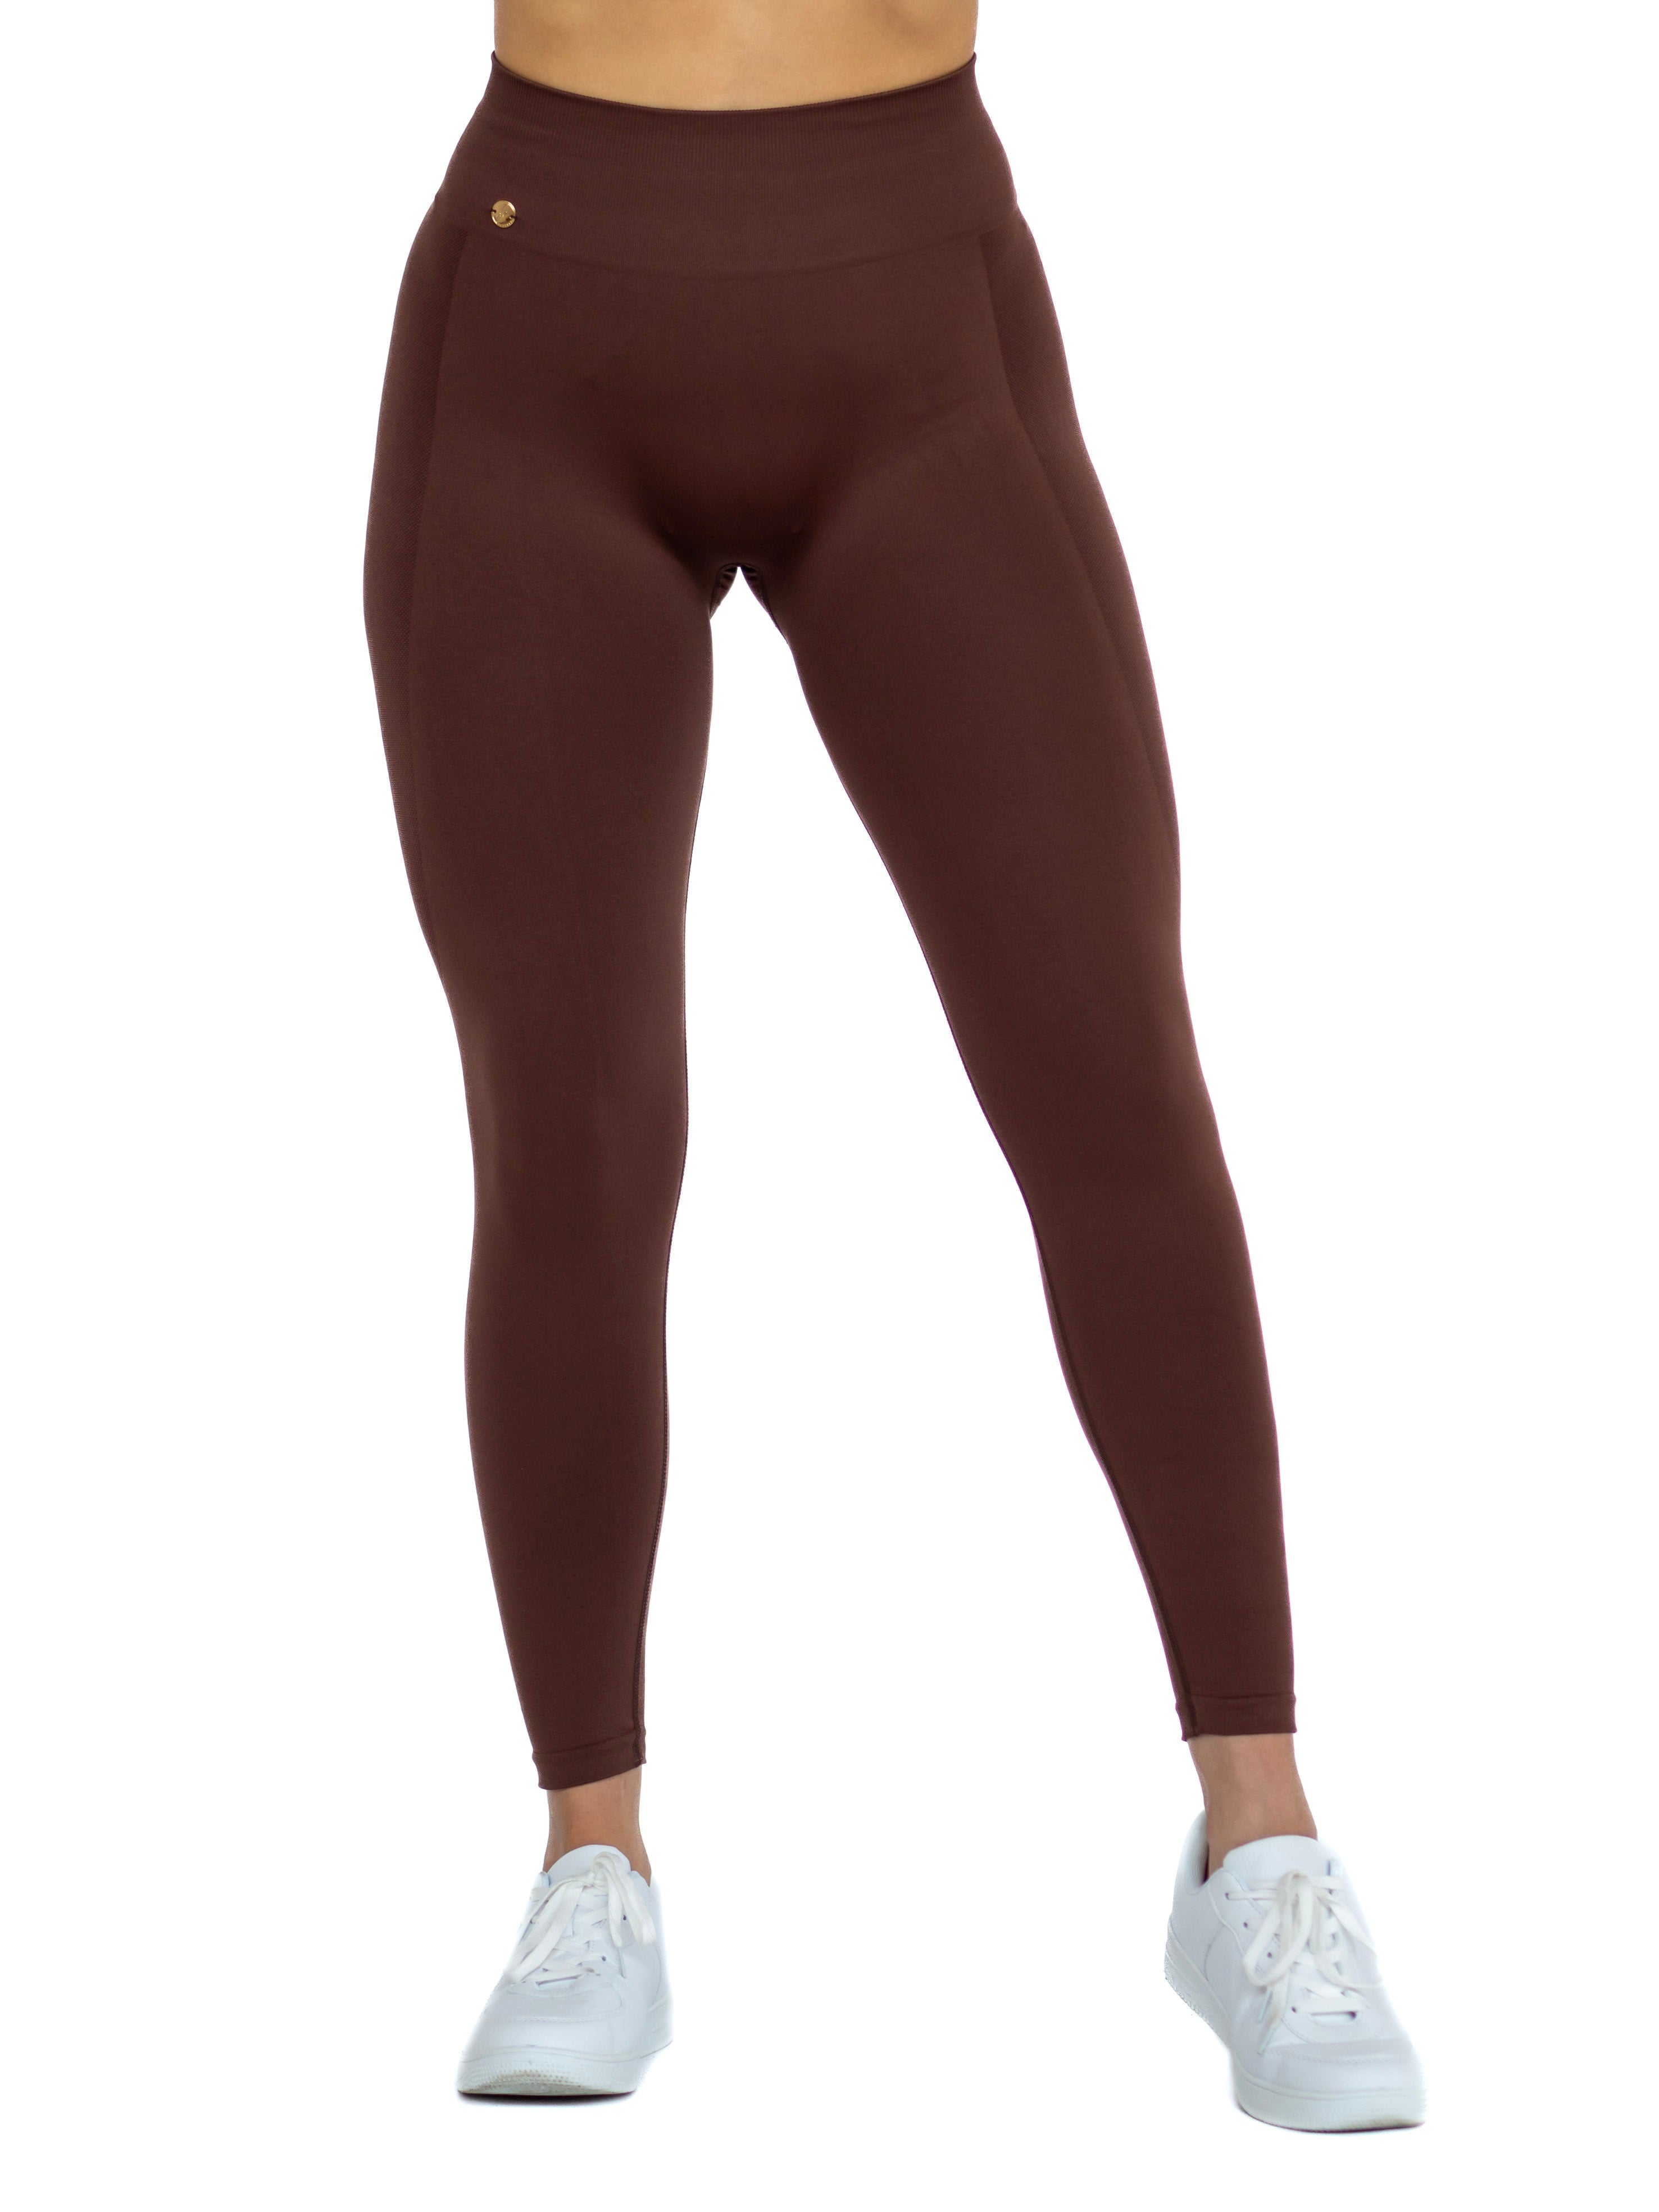 Passion Tights - Chocolate